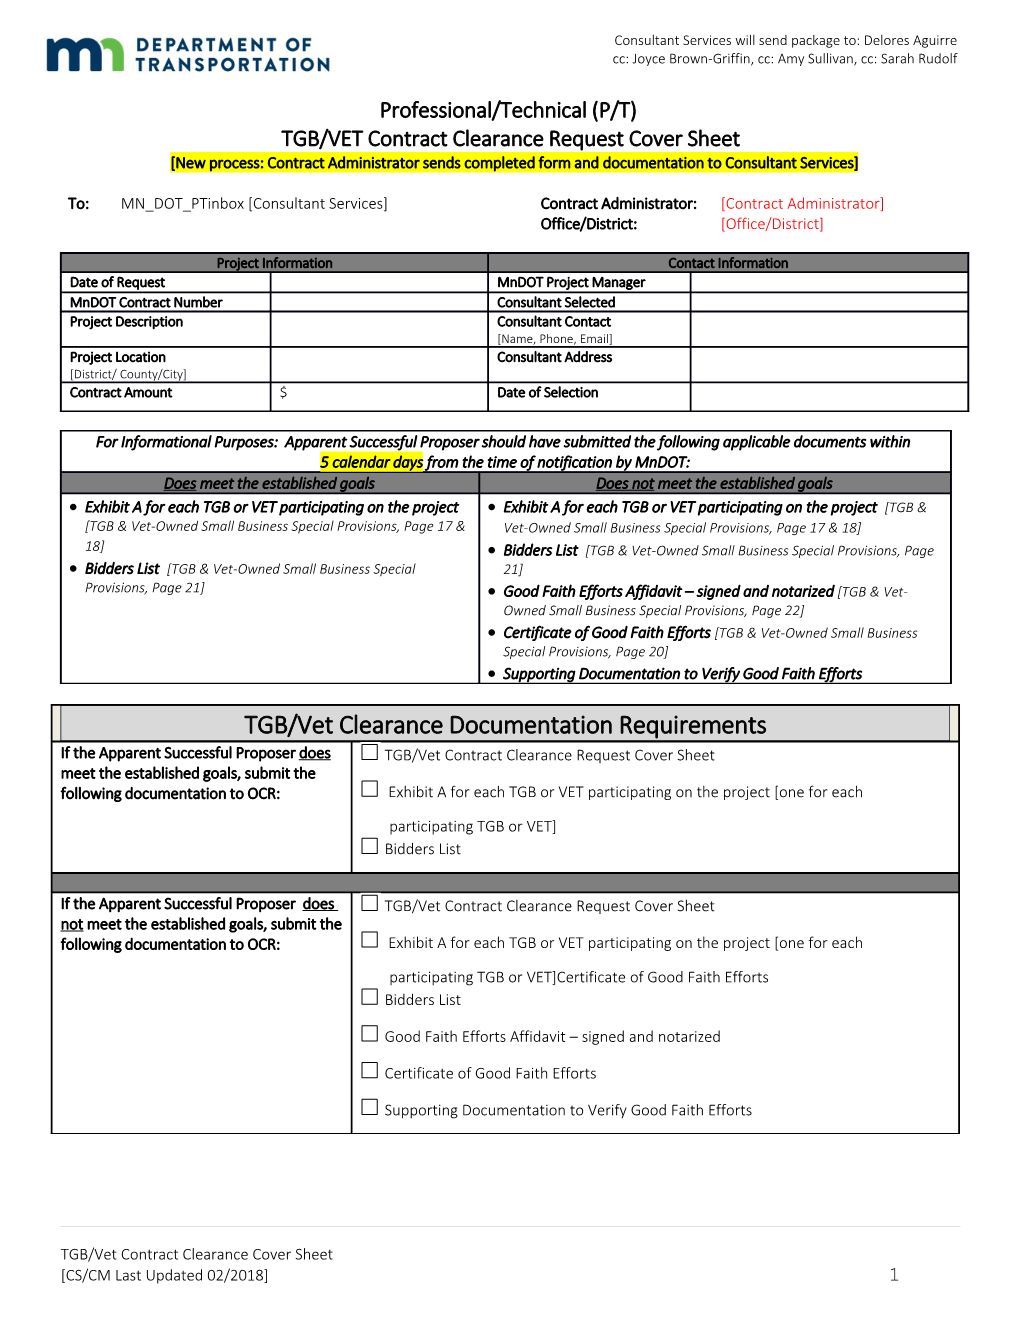 TGB/VET Contract Clearance Request Cover Sheet